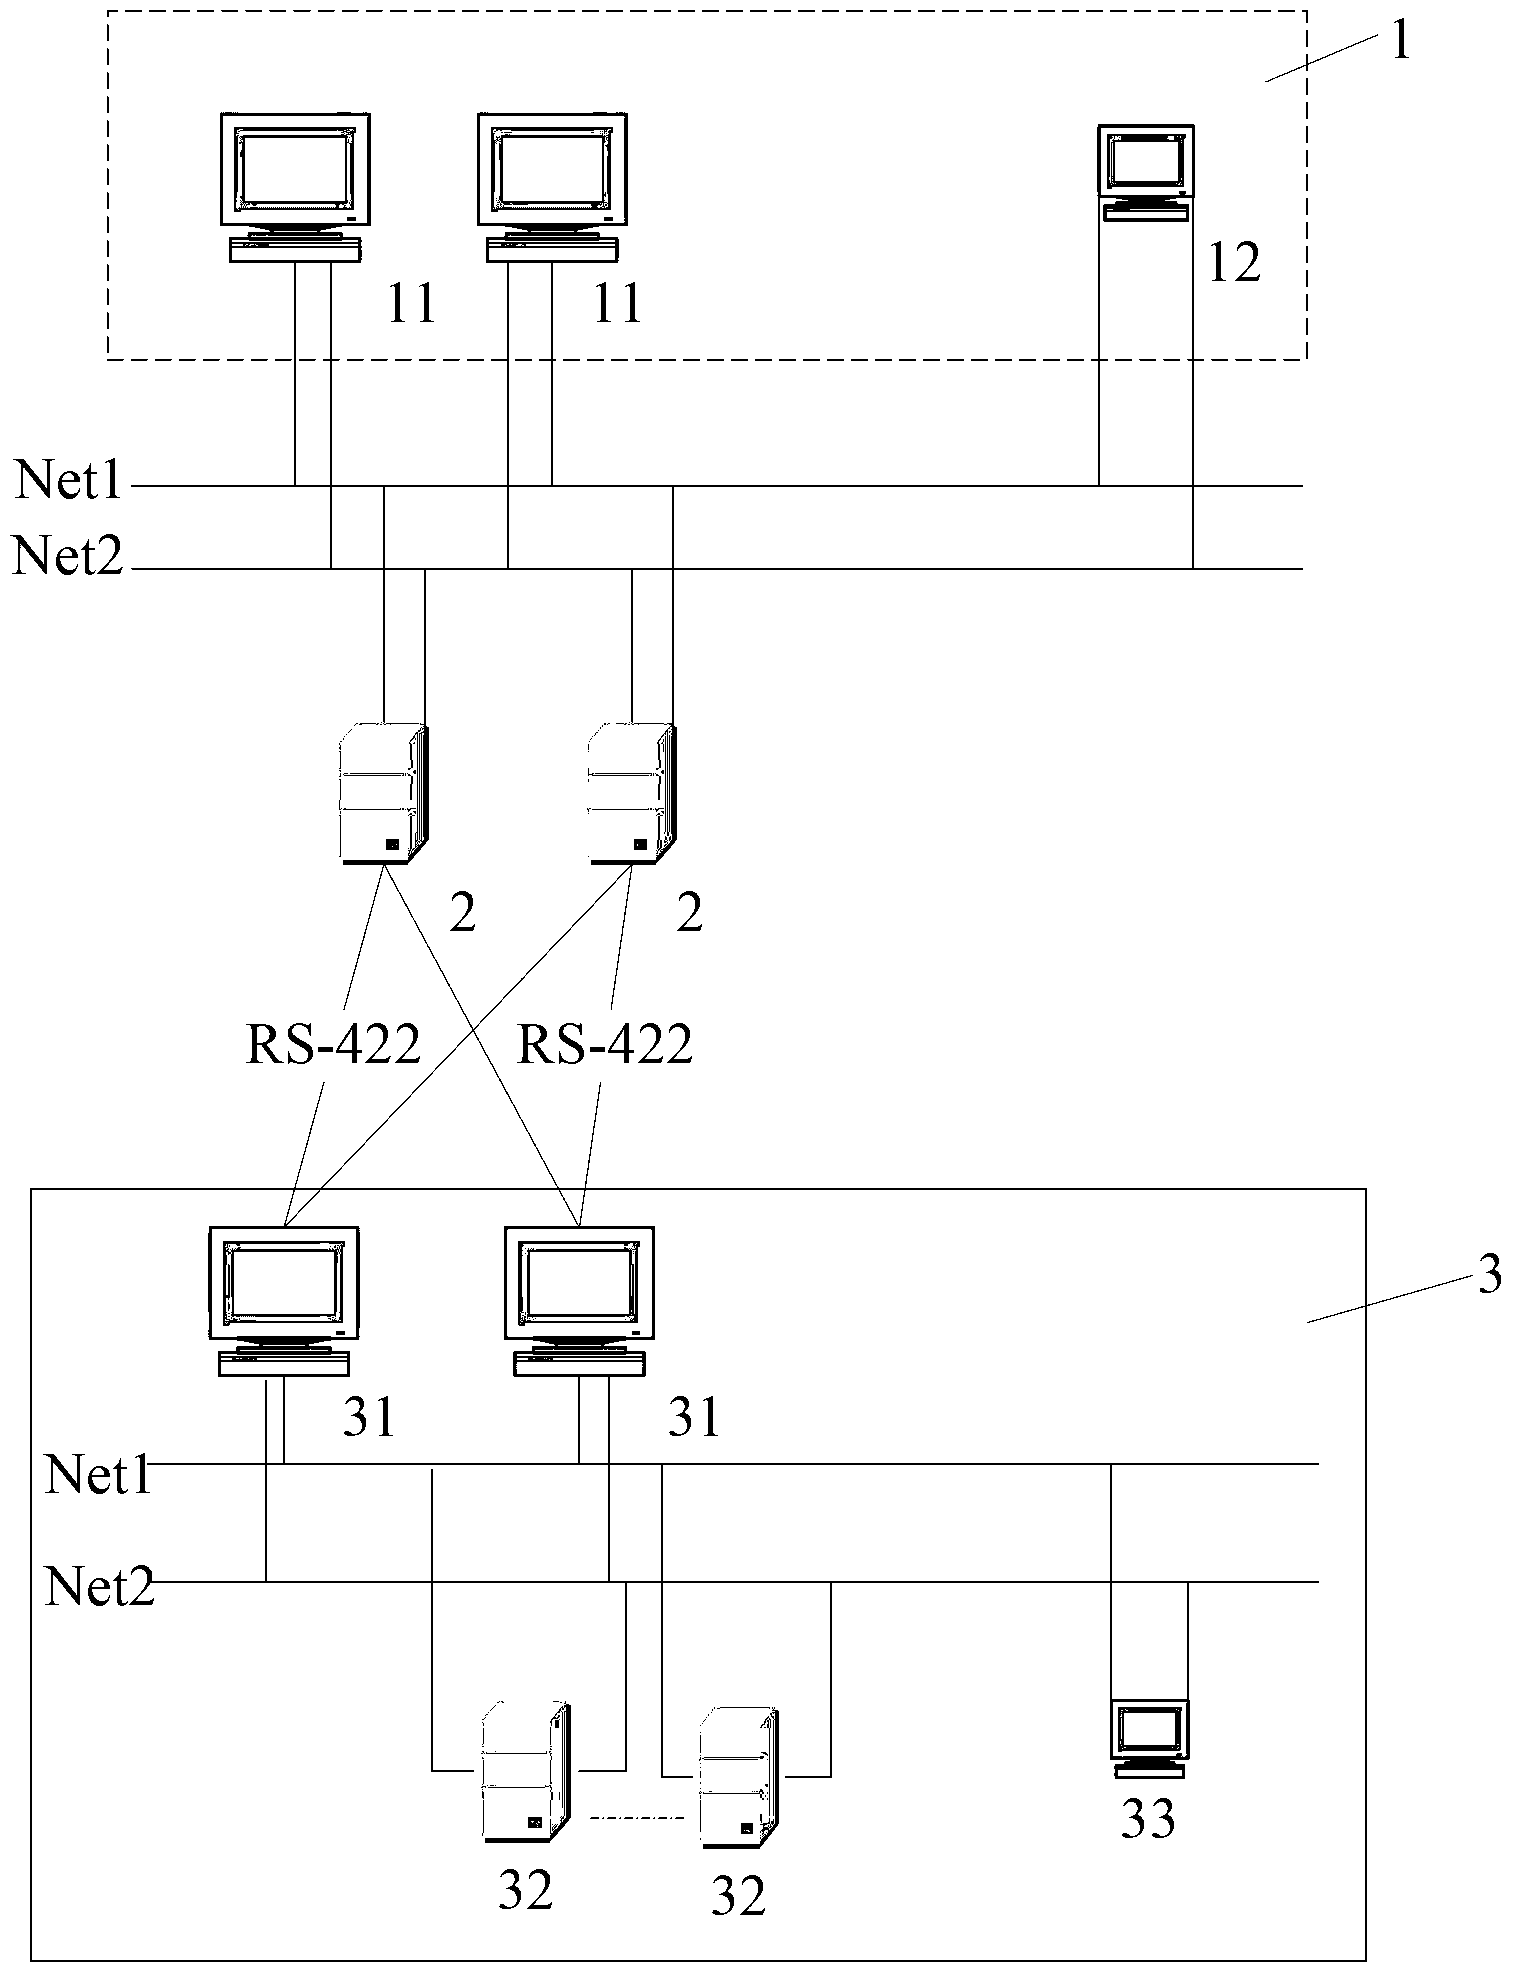 Computer interlocking system with centralized control function